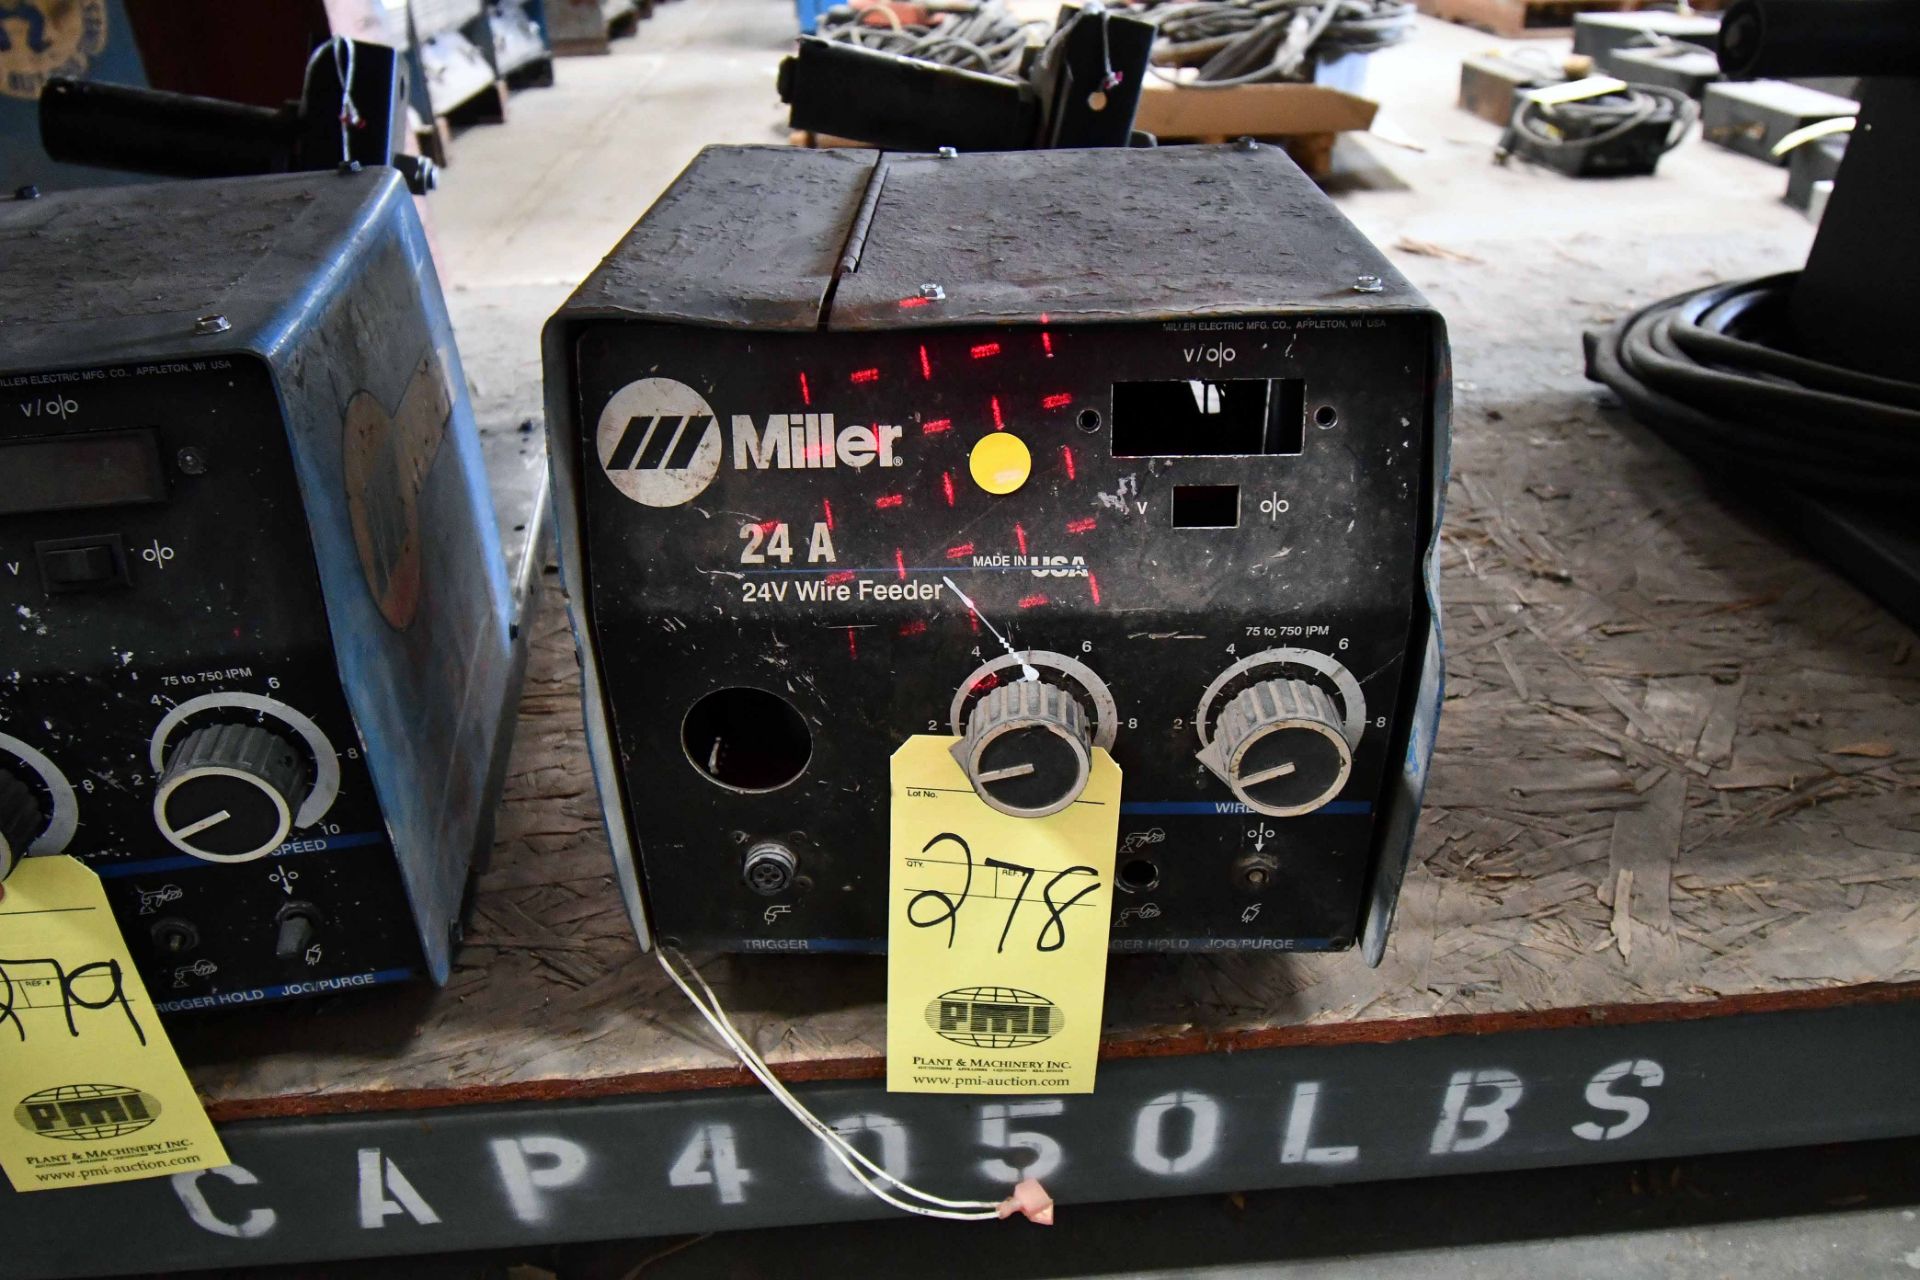 WIRE FEEDER, MILLER 24A, 24 v., new 2006, S/N LG380312W (needs repair)